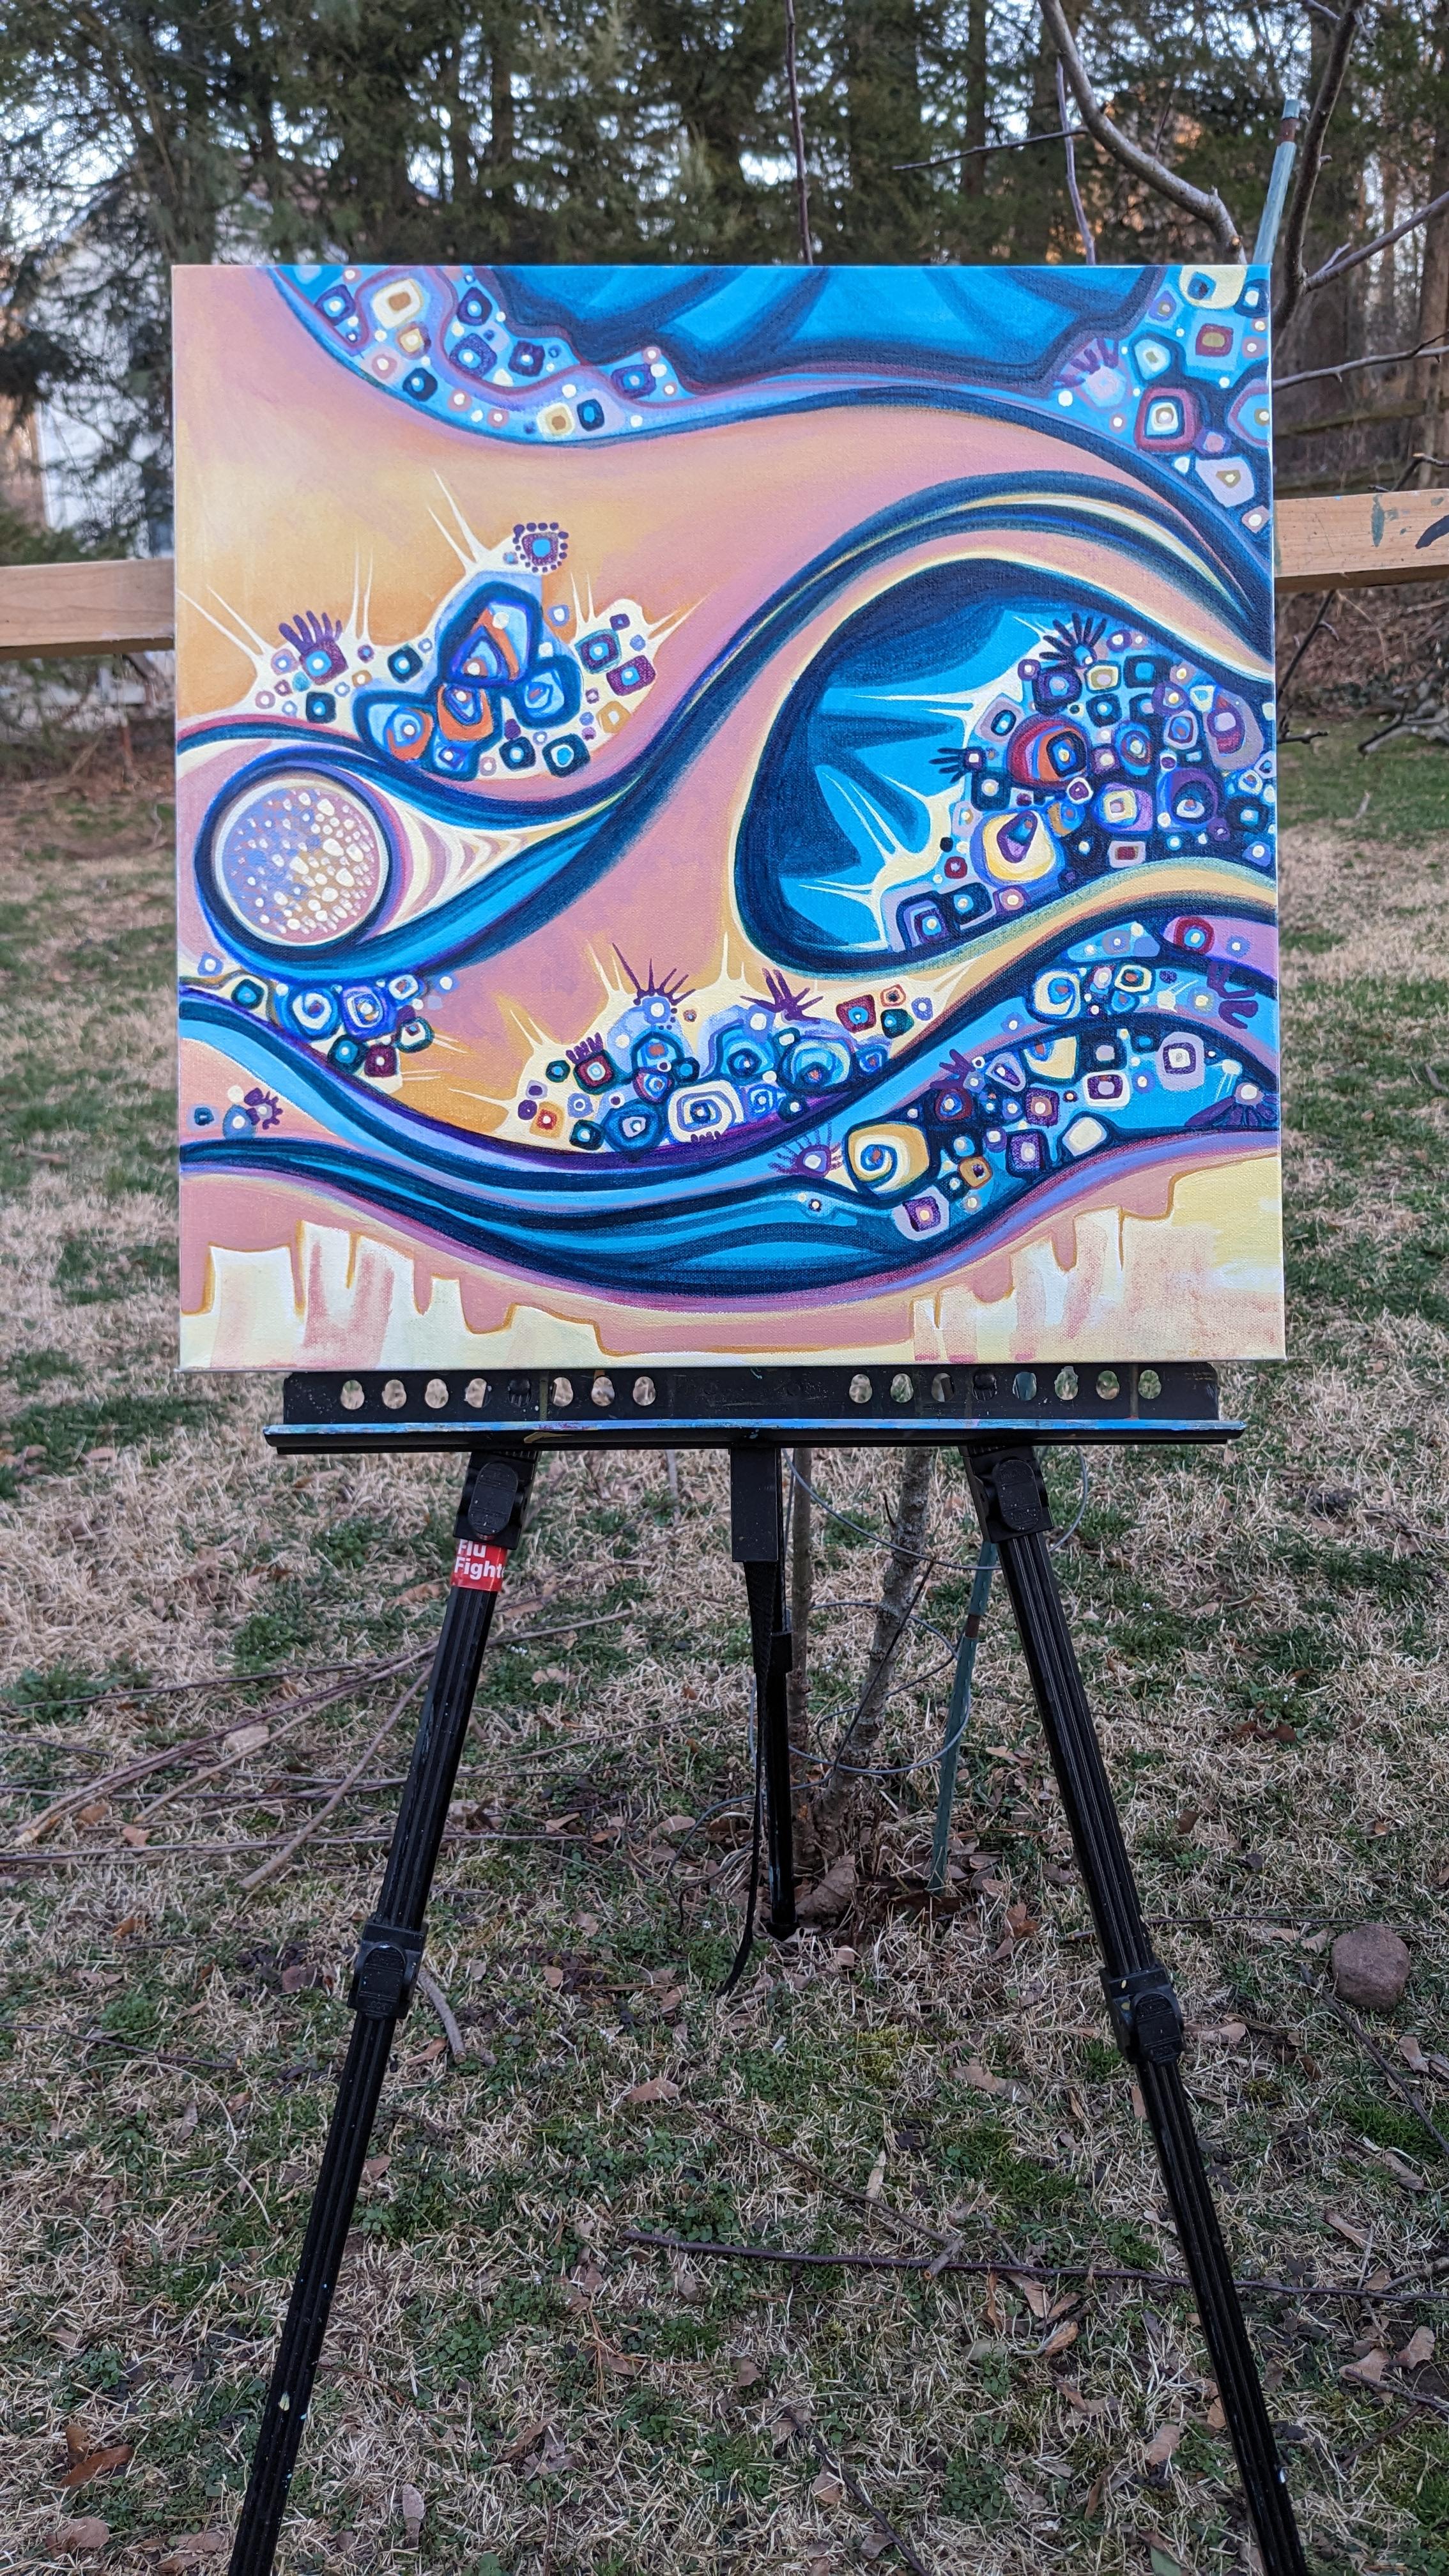 <p>Artist Comments<br>The artwork portrays an abstract depiction of the moon emerging in the sky. It invites exploration of artistic interpretations of a cosmic landscape. Captivated by the images from the James Webb Telescope, artist Diana Elena